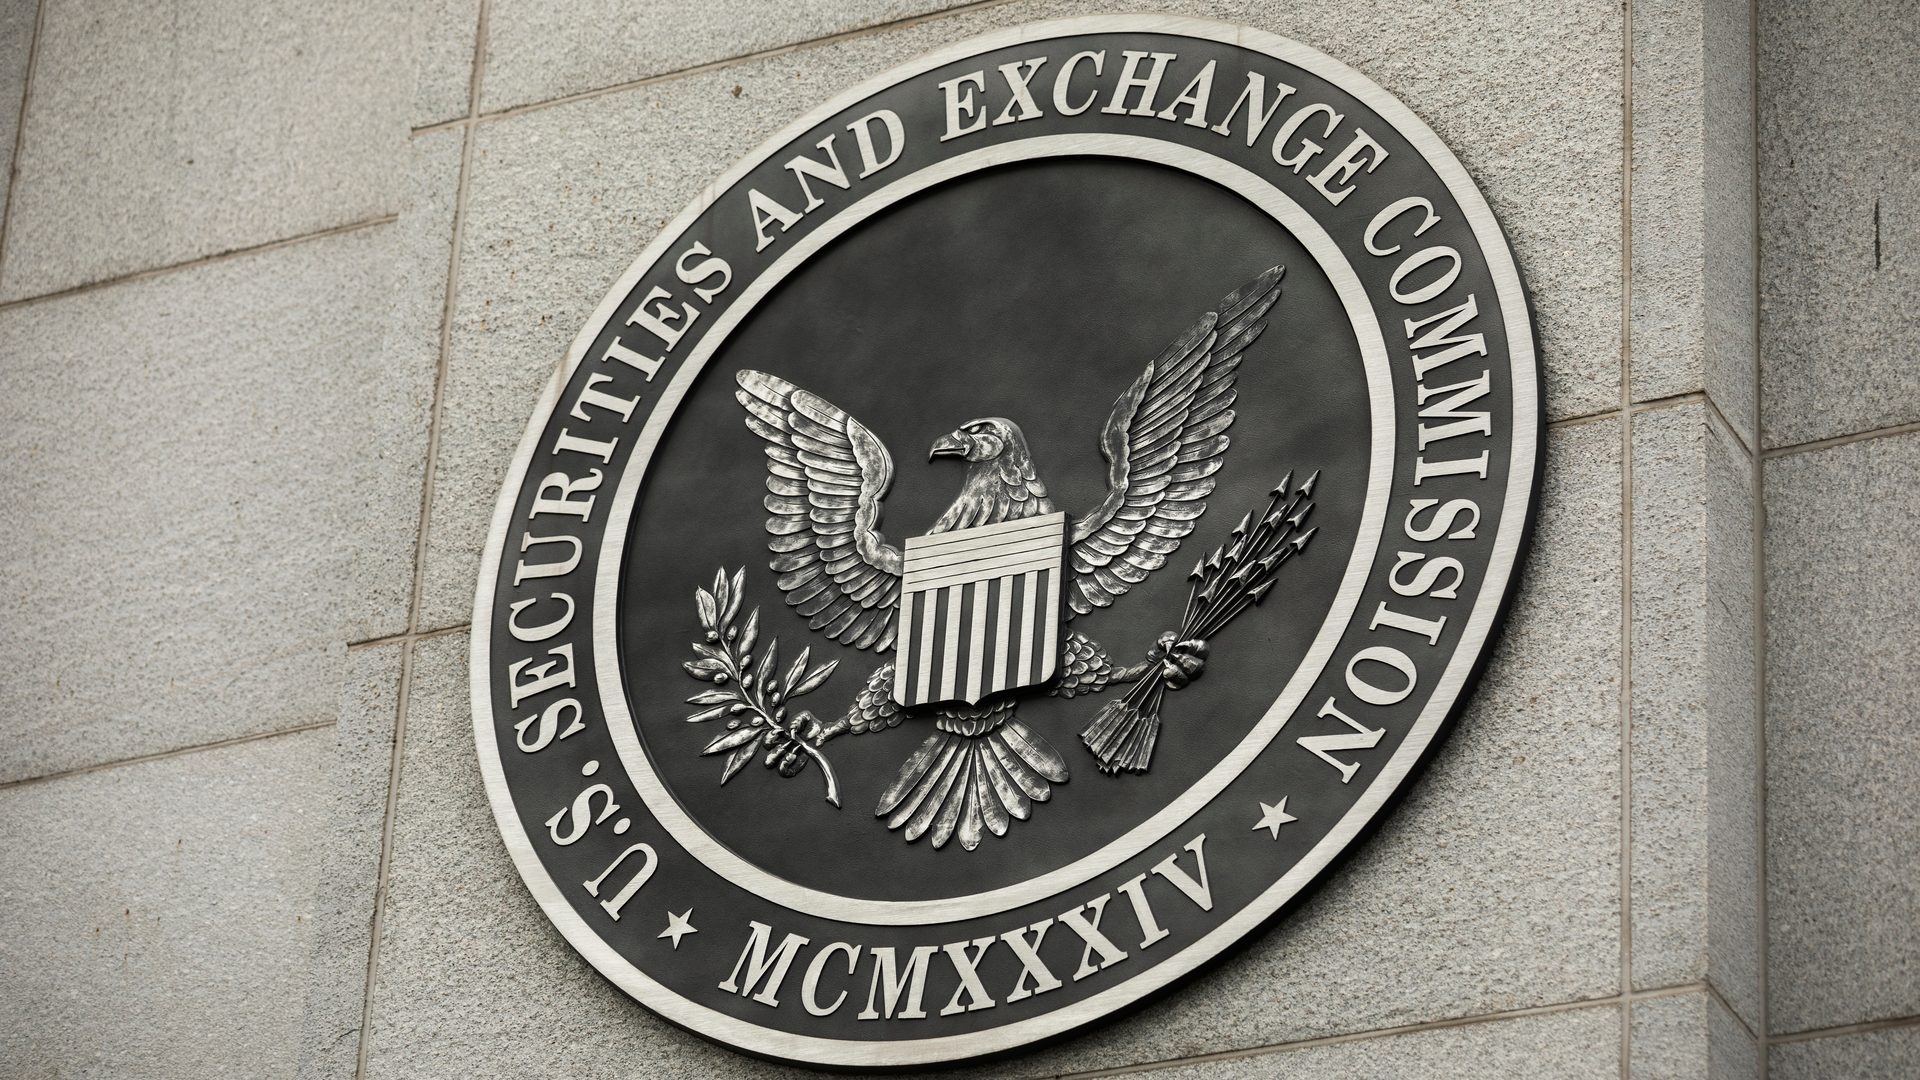 The SEC rules that Ethereum transactions take place in the United States